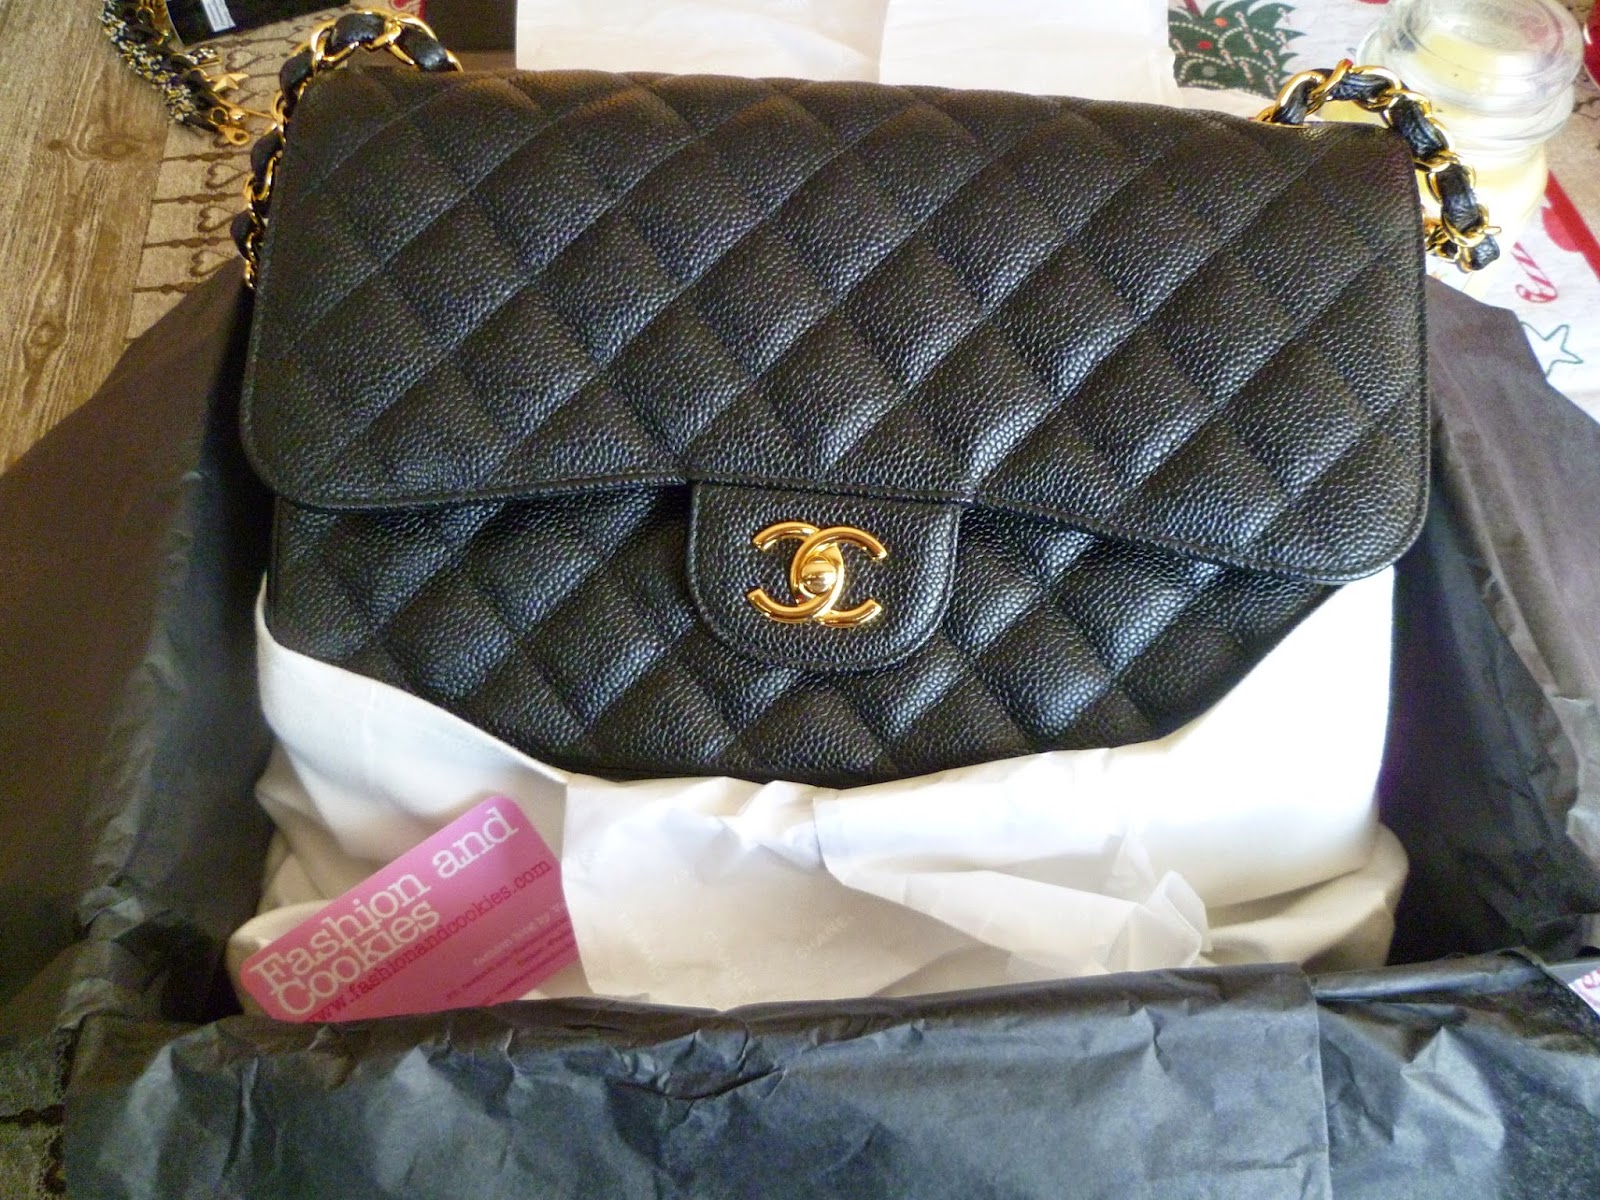 Chanel 2.55 classic flap bag in grained calfskin leather on Fashion and Cookies fashion blog